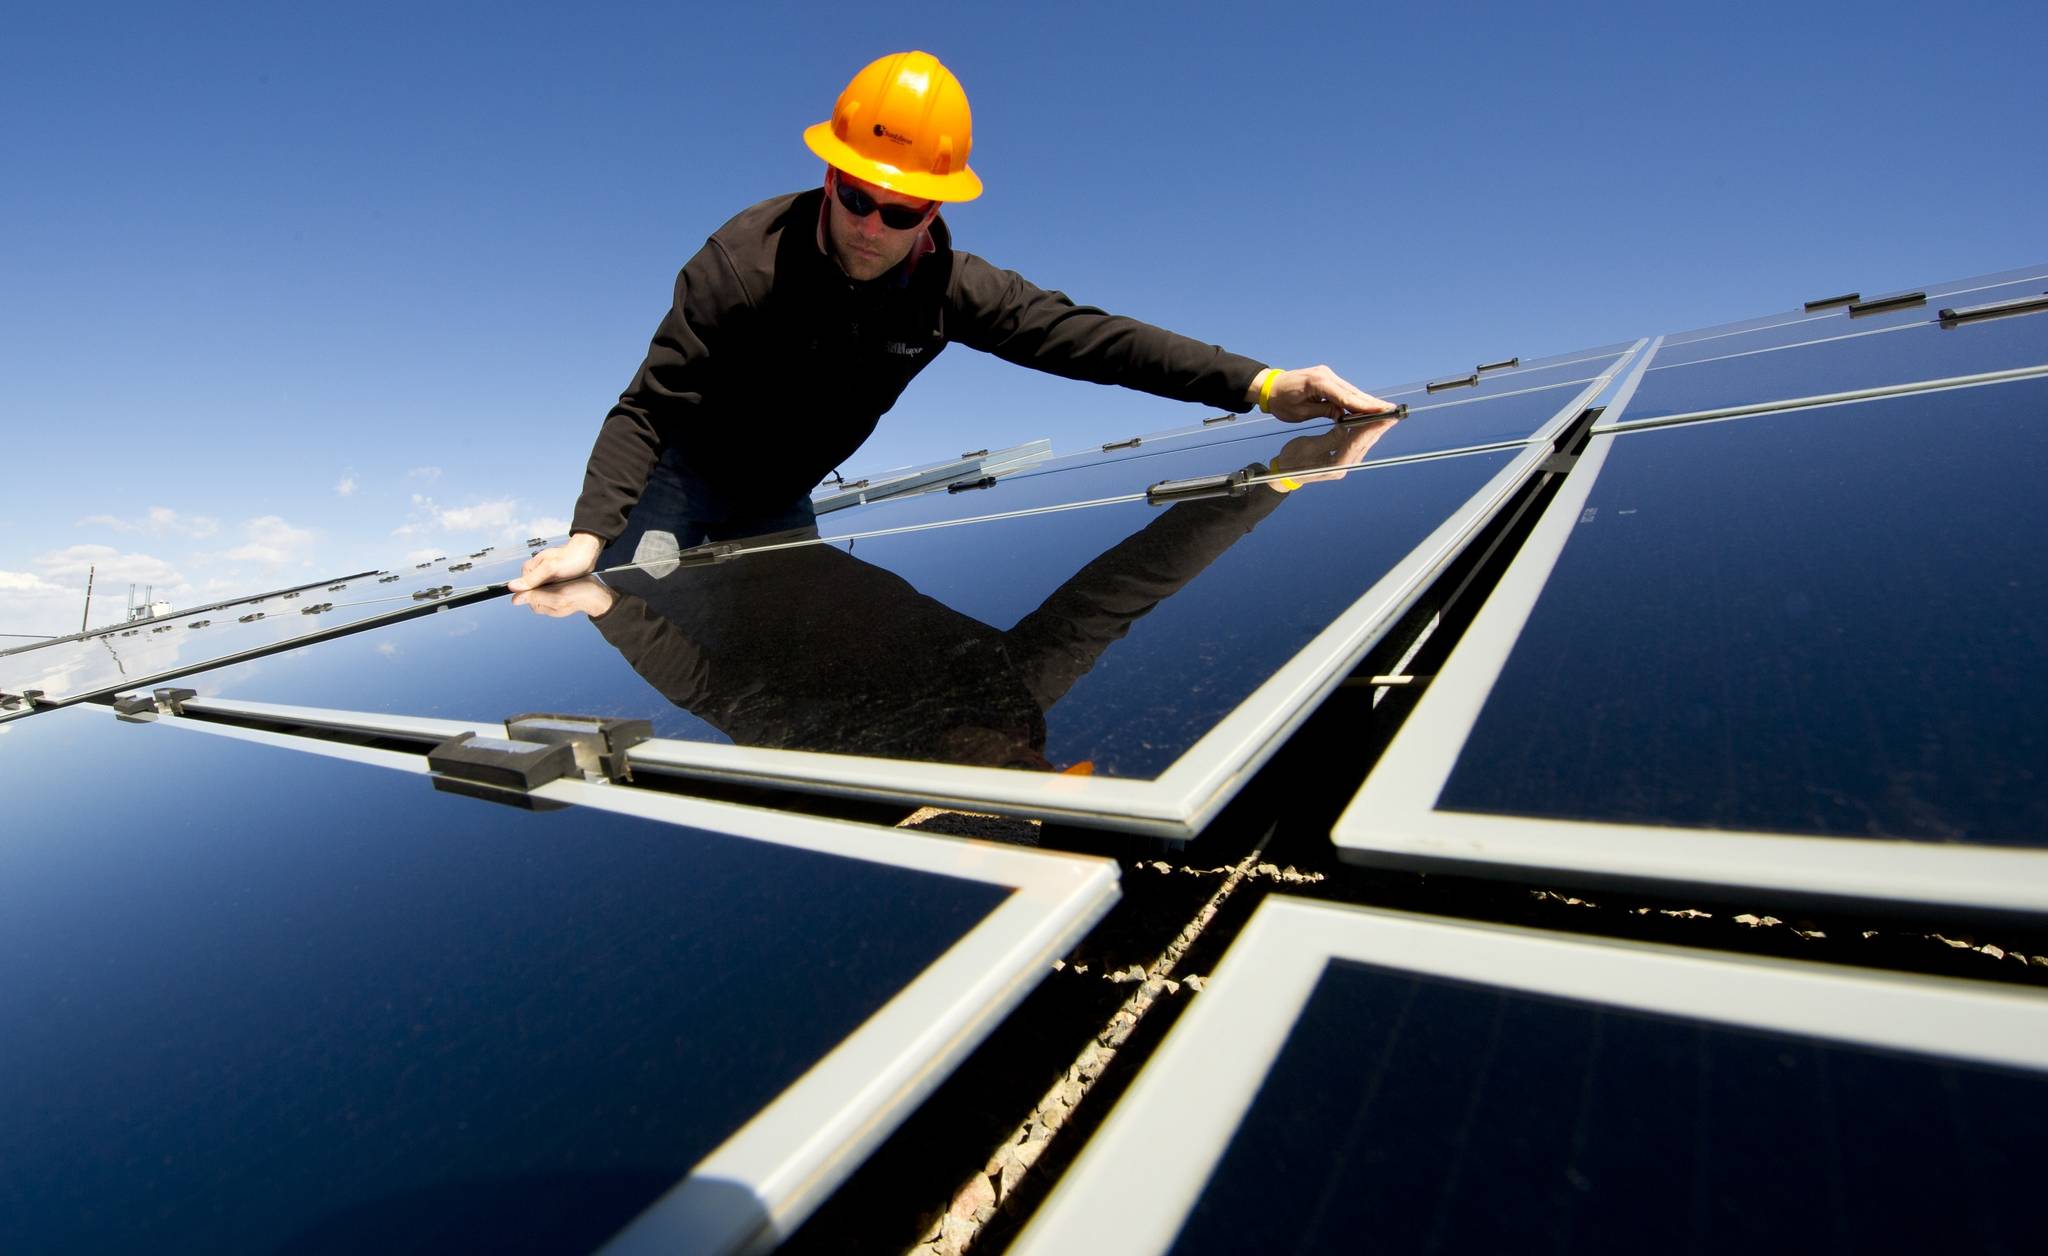 Americans look into solar power to safeguard homes